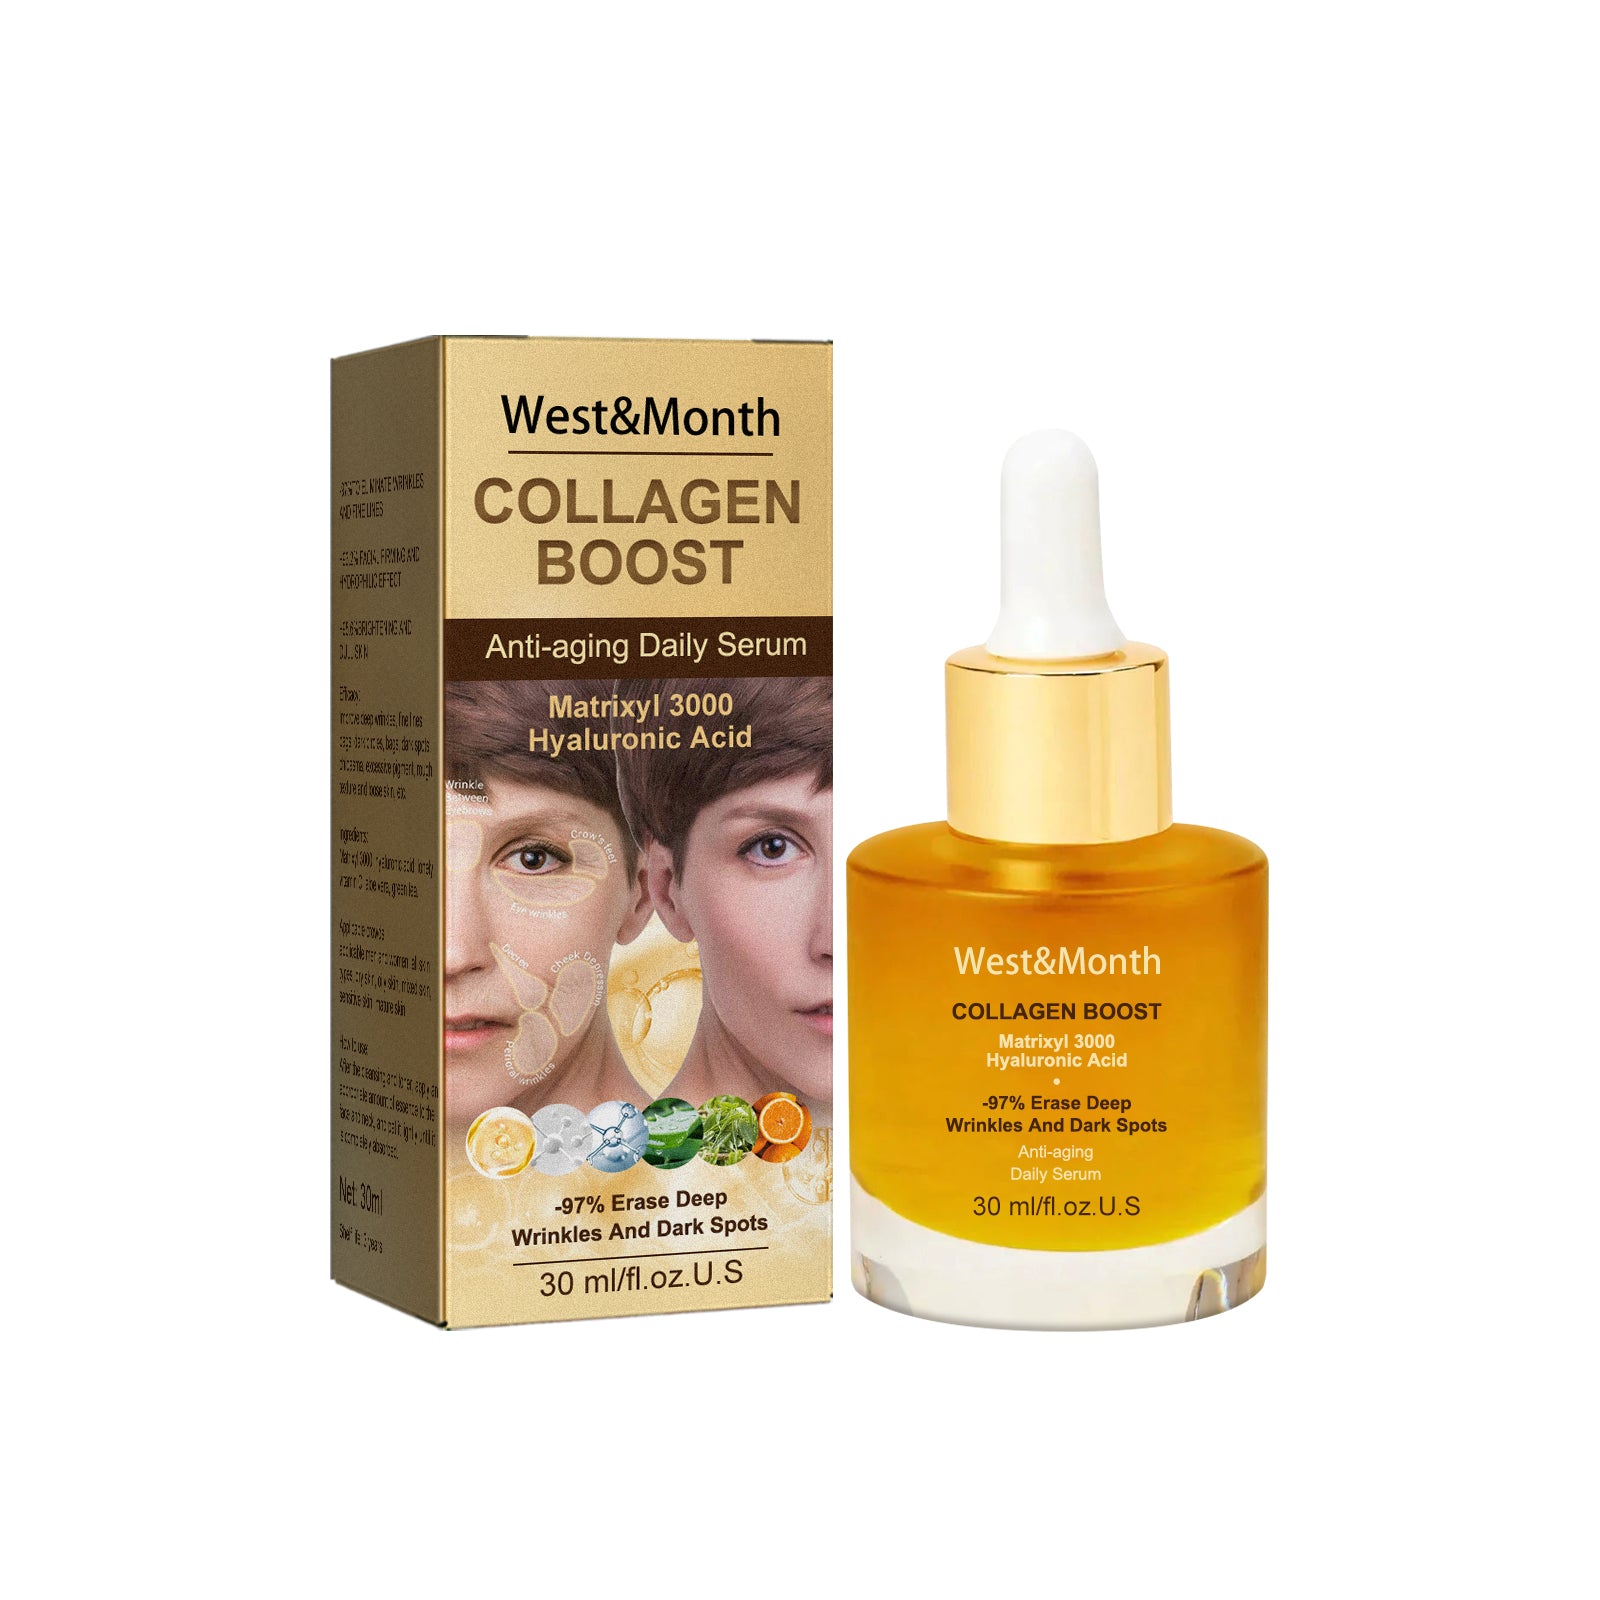 West&Month Collagen Anti-Wrinkle Essence fades spots, repairs skin barrier, hydrates and moisturizes